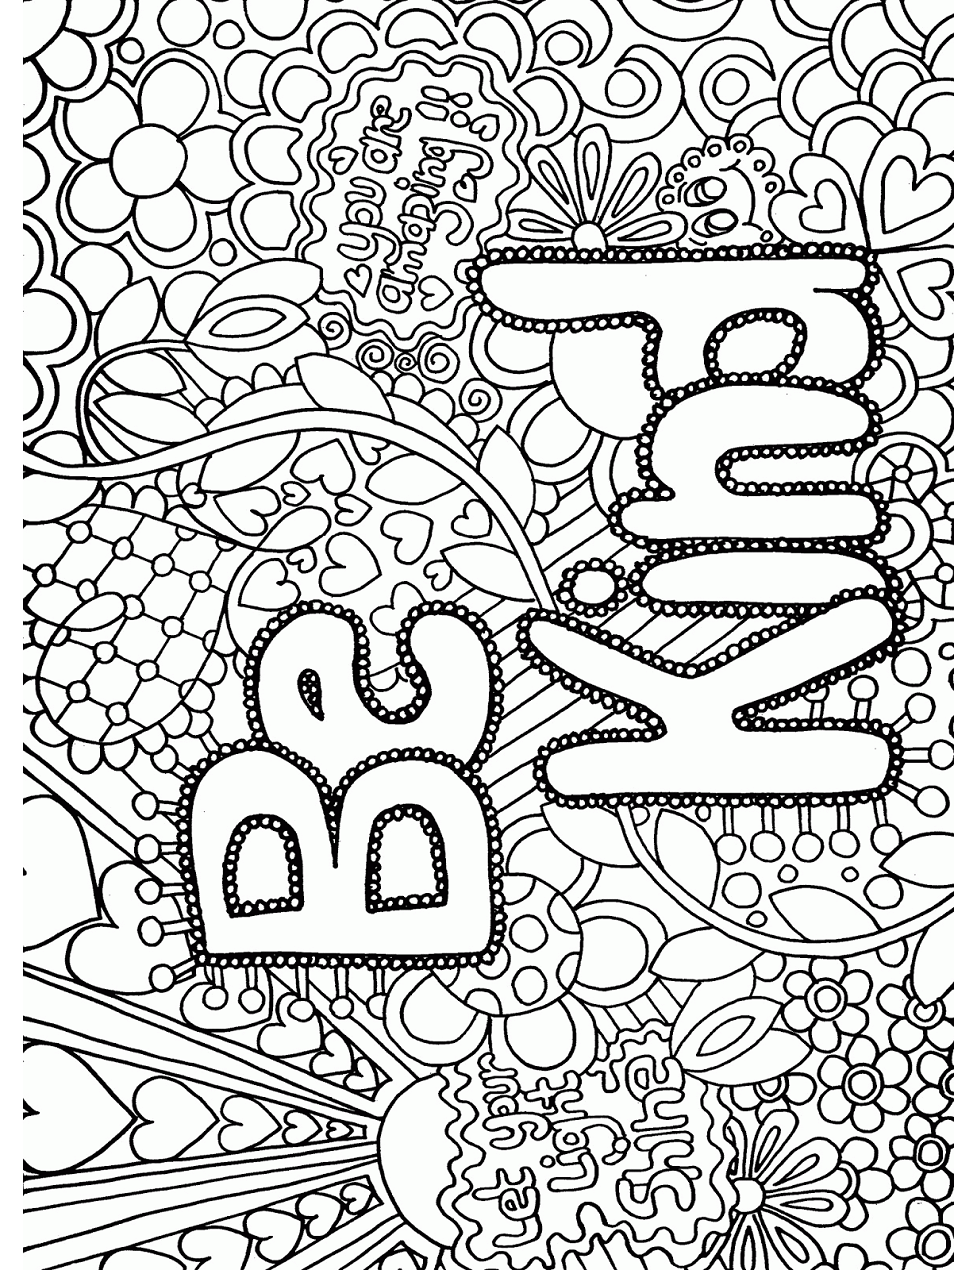 Be Kind Coloring Page Colouring Page B105 Attack